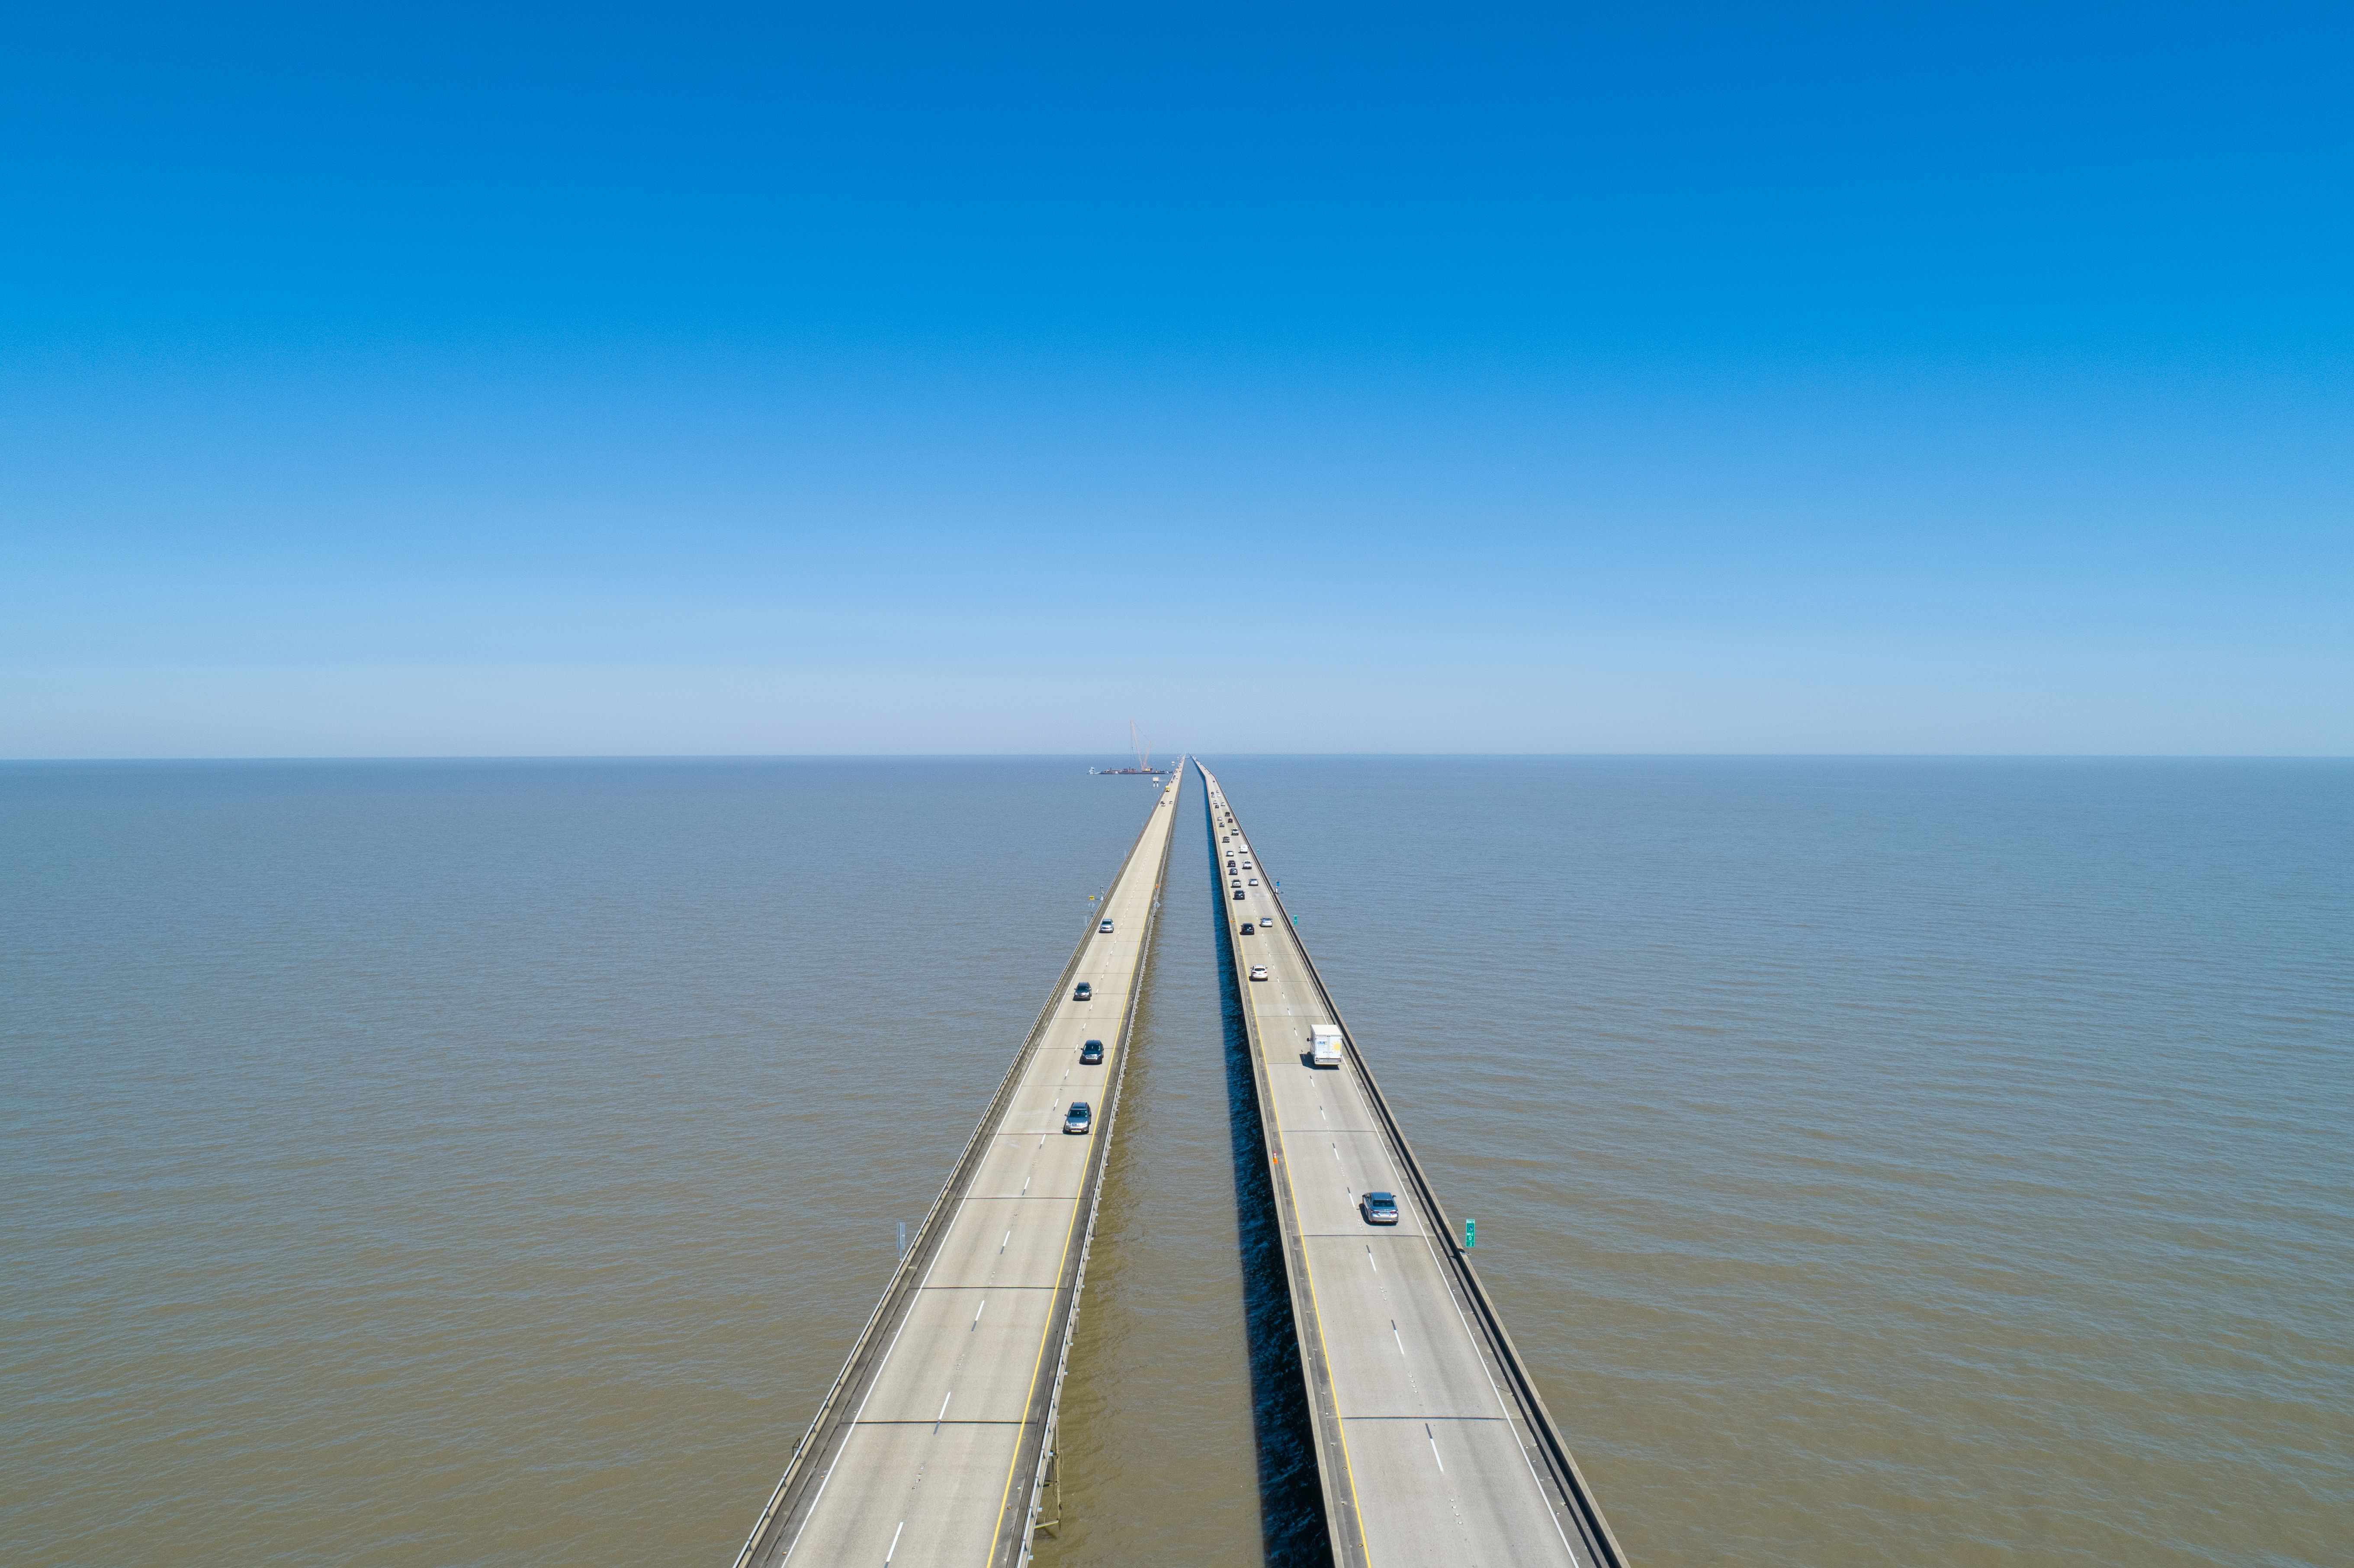 Lake Pontchartrain Causeway bridge with some cars passing on it from an above angle